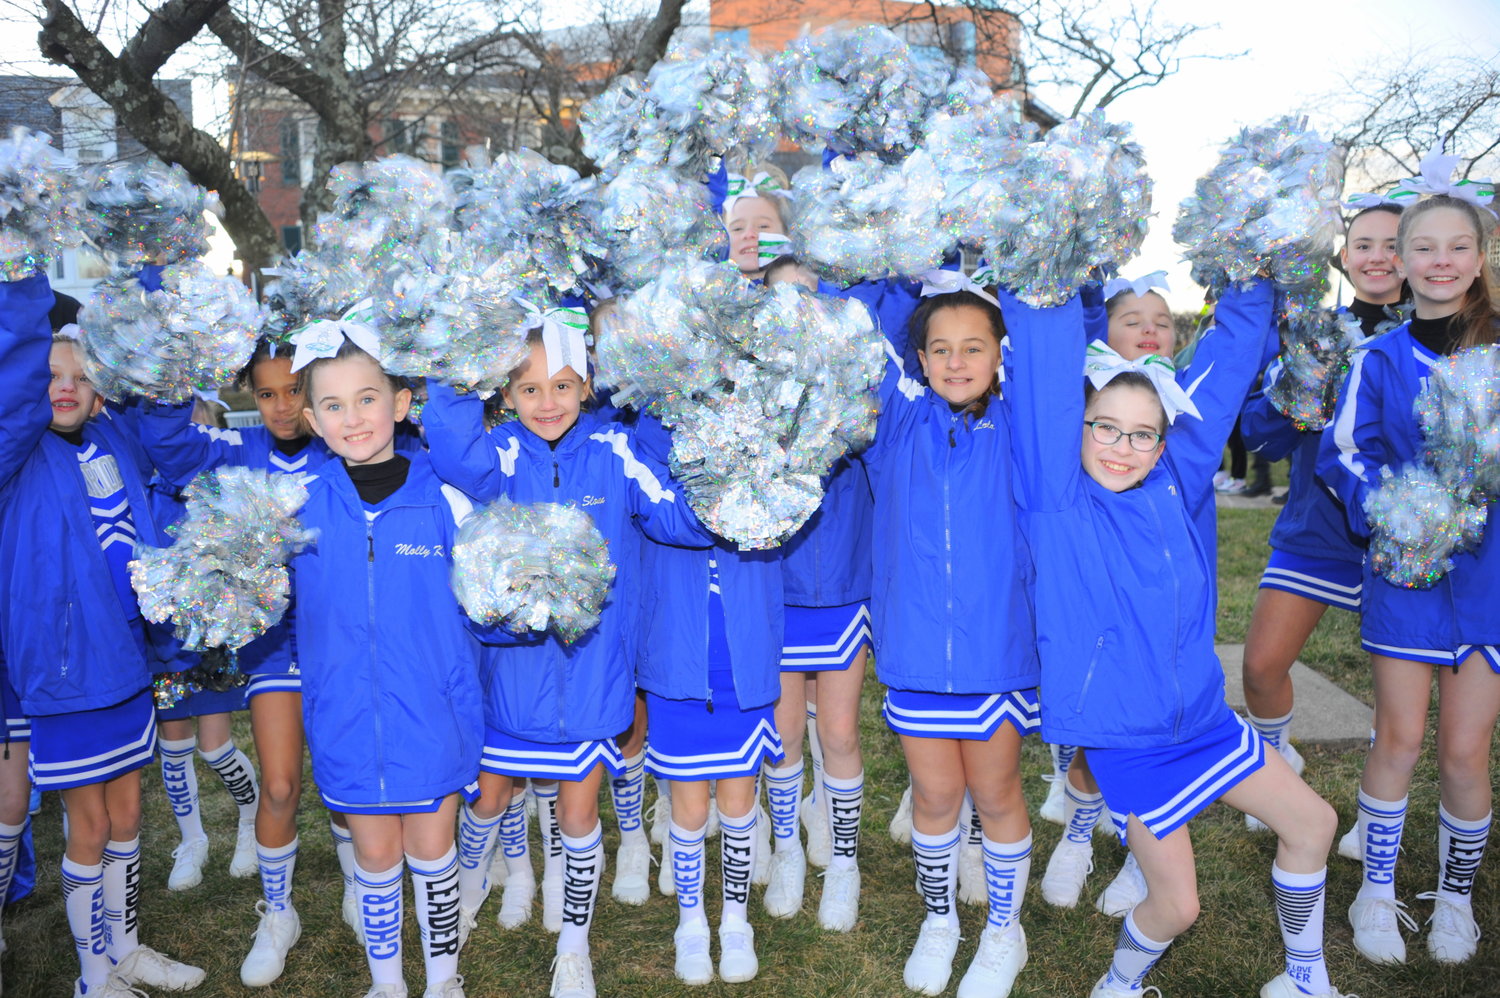 Warrington Warriors Cheer Squad squad members add a little spirit to the Herald’s “Bucks County Loves the Birds” pep rally on the lawn of the old county courthouse in Doylestown.